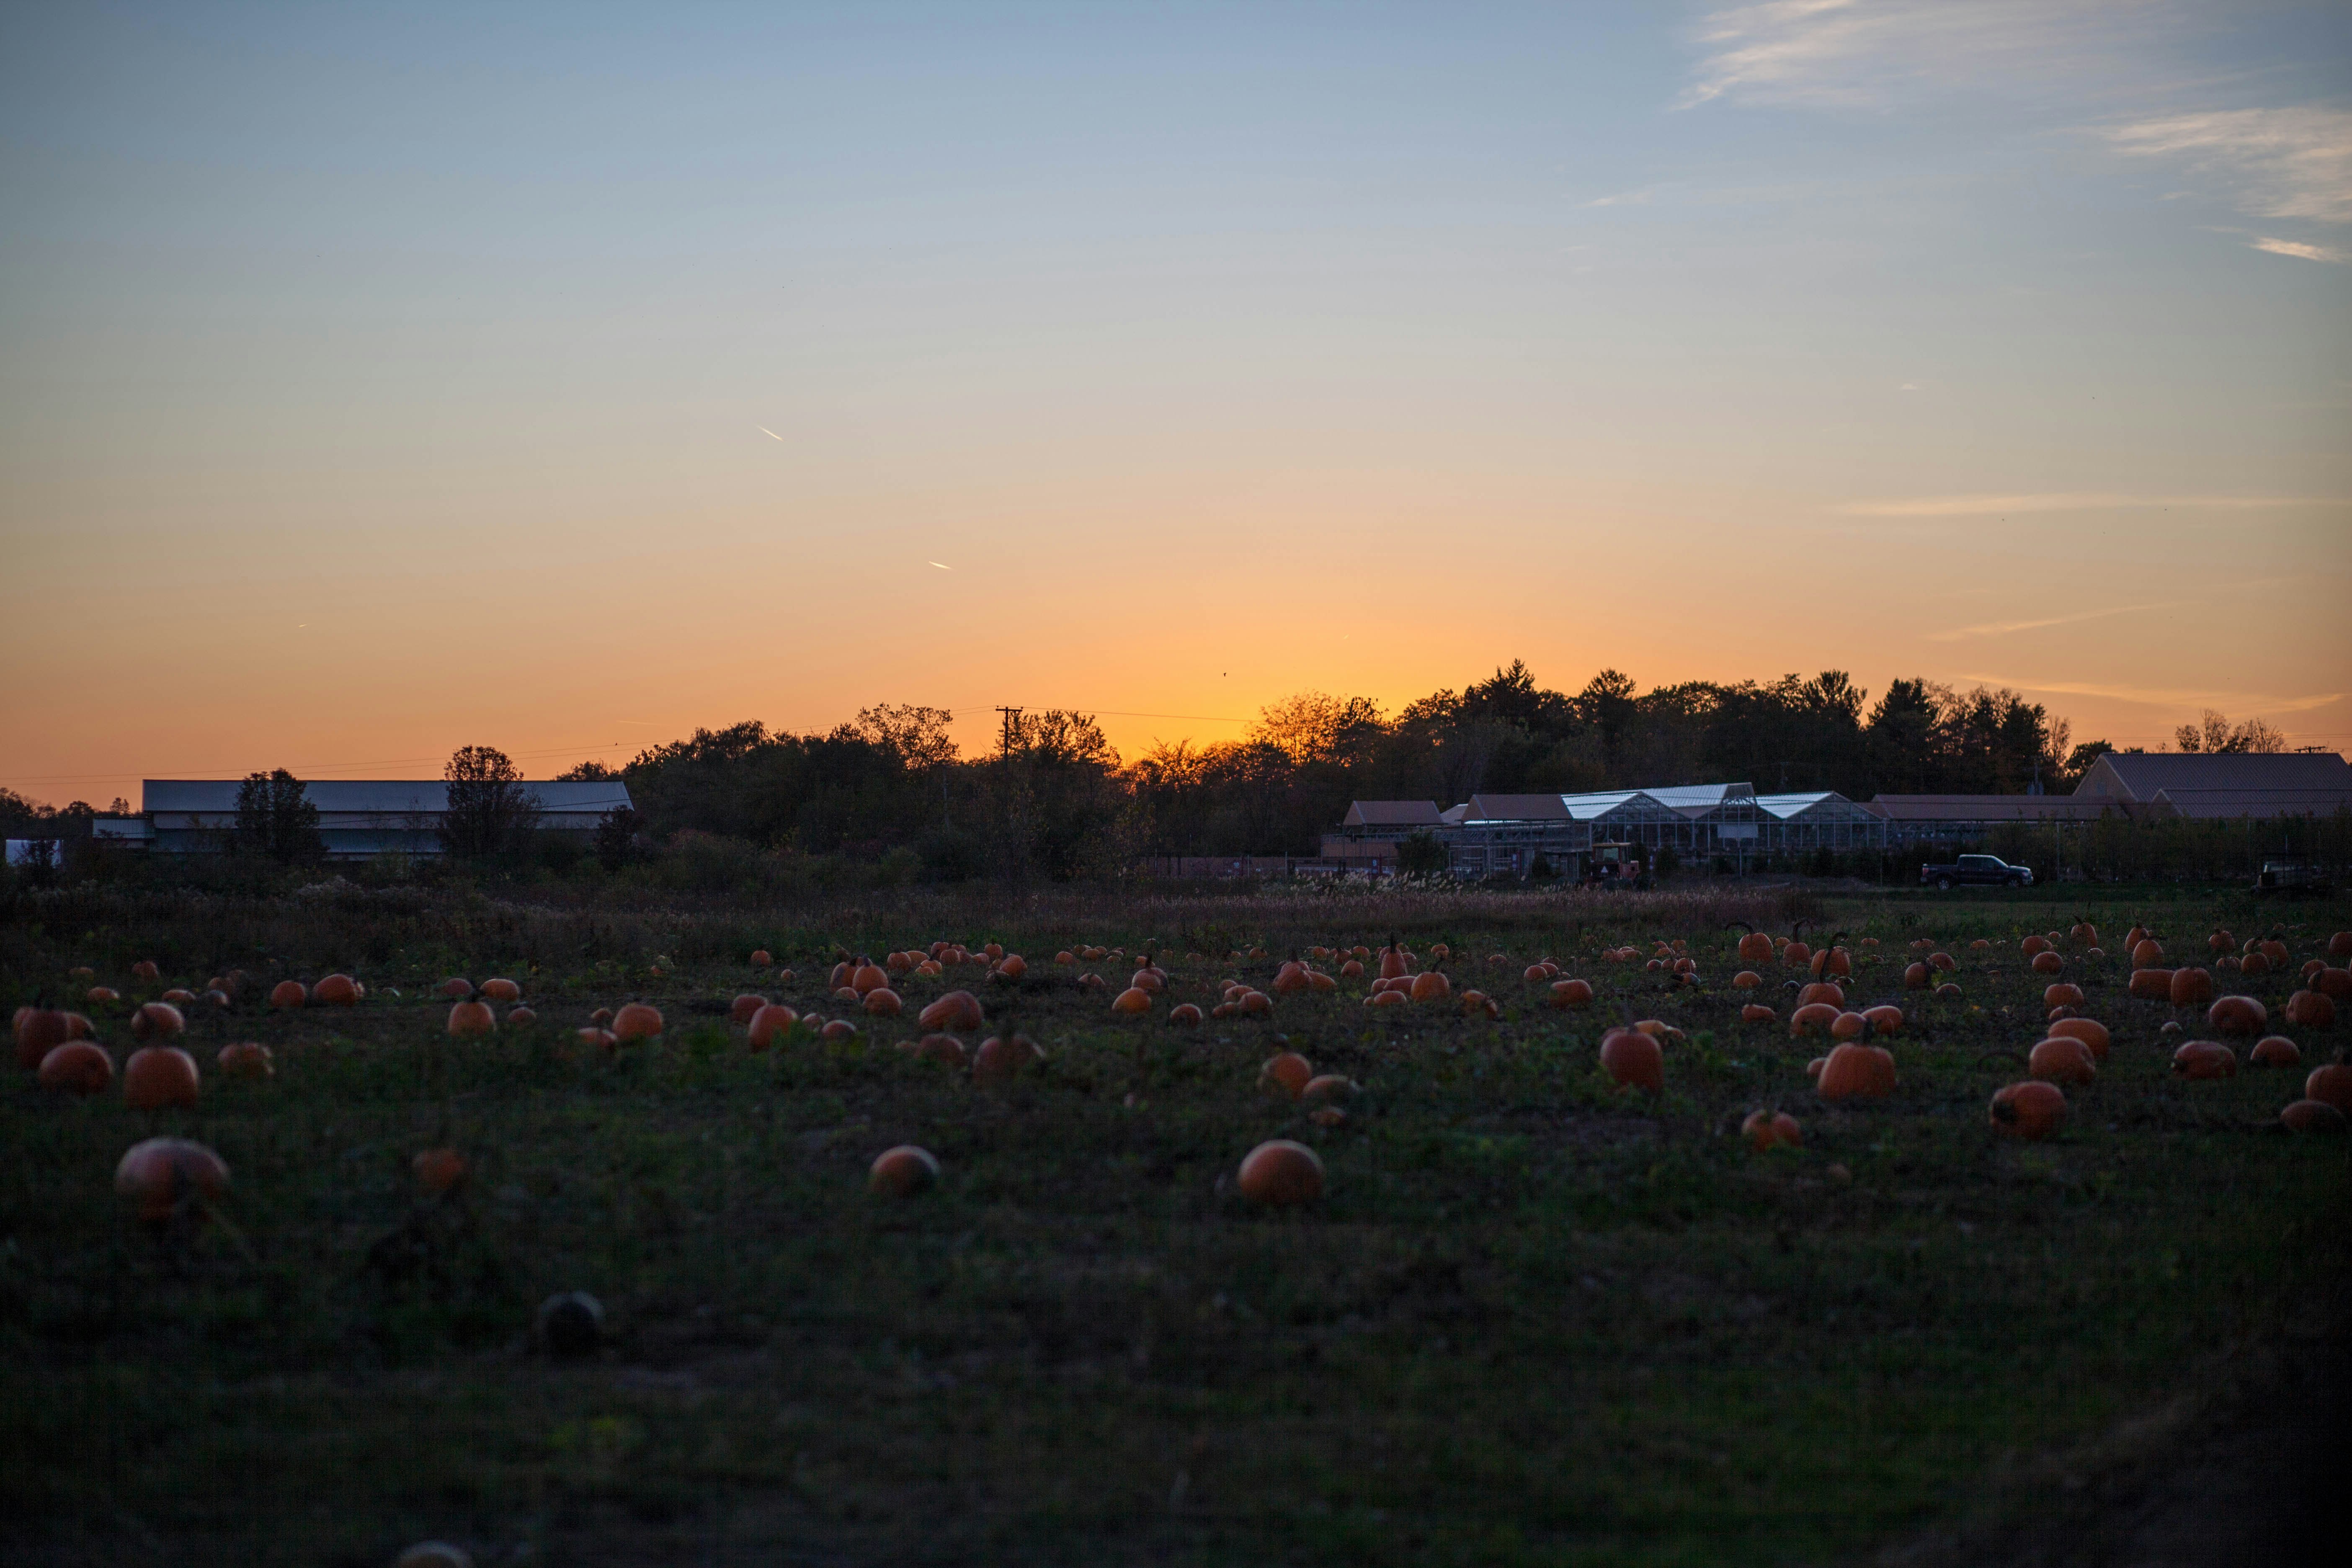 On our way out from our annual trip to the pumpkin patch, I snapped this photo right as the sunset below the tree line.